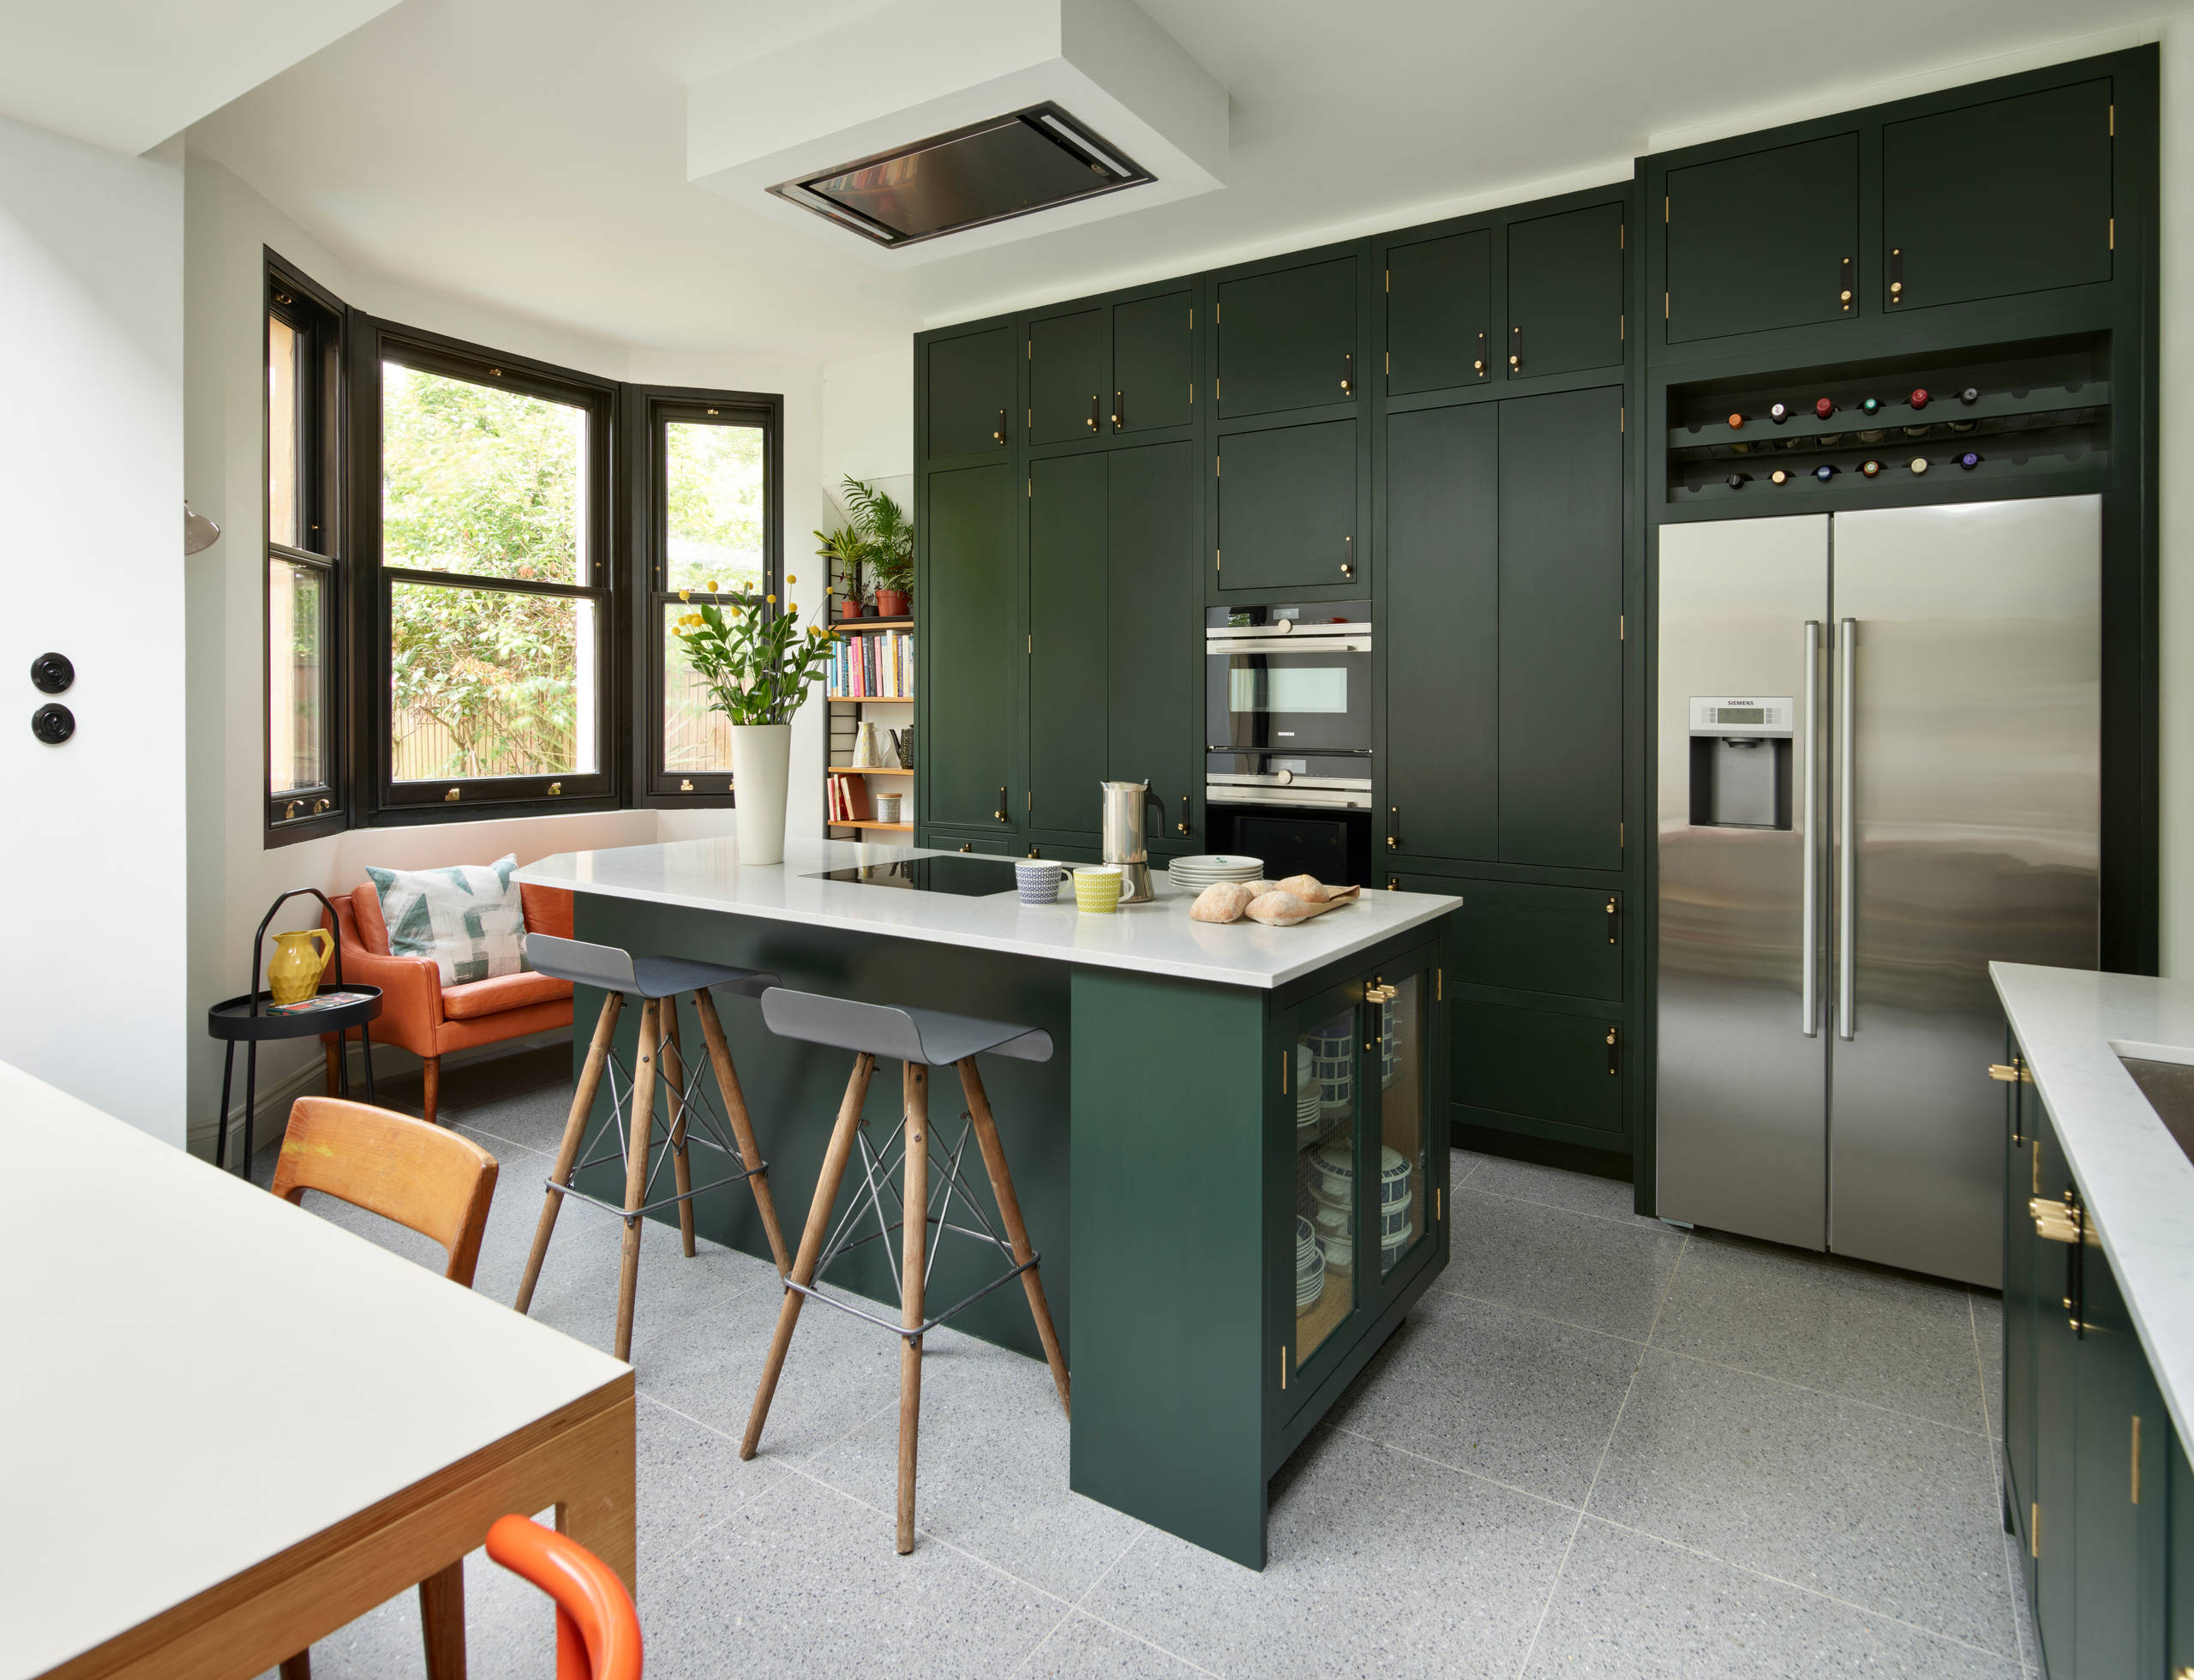 Should I Go for Floor to ceiling Cabinets in My Kitchen   Houzz UK